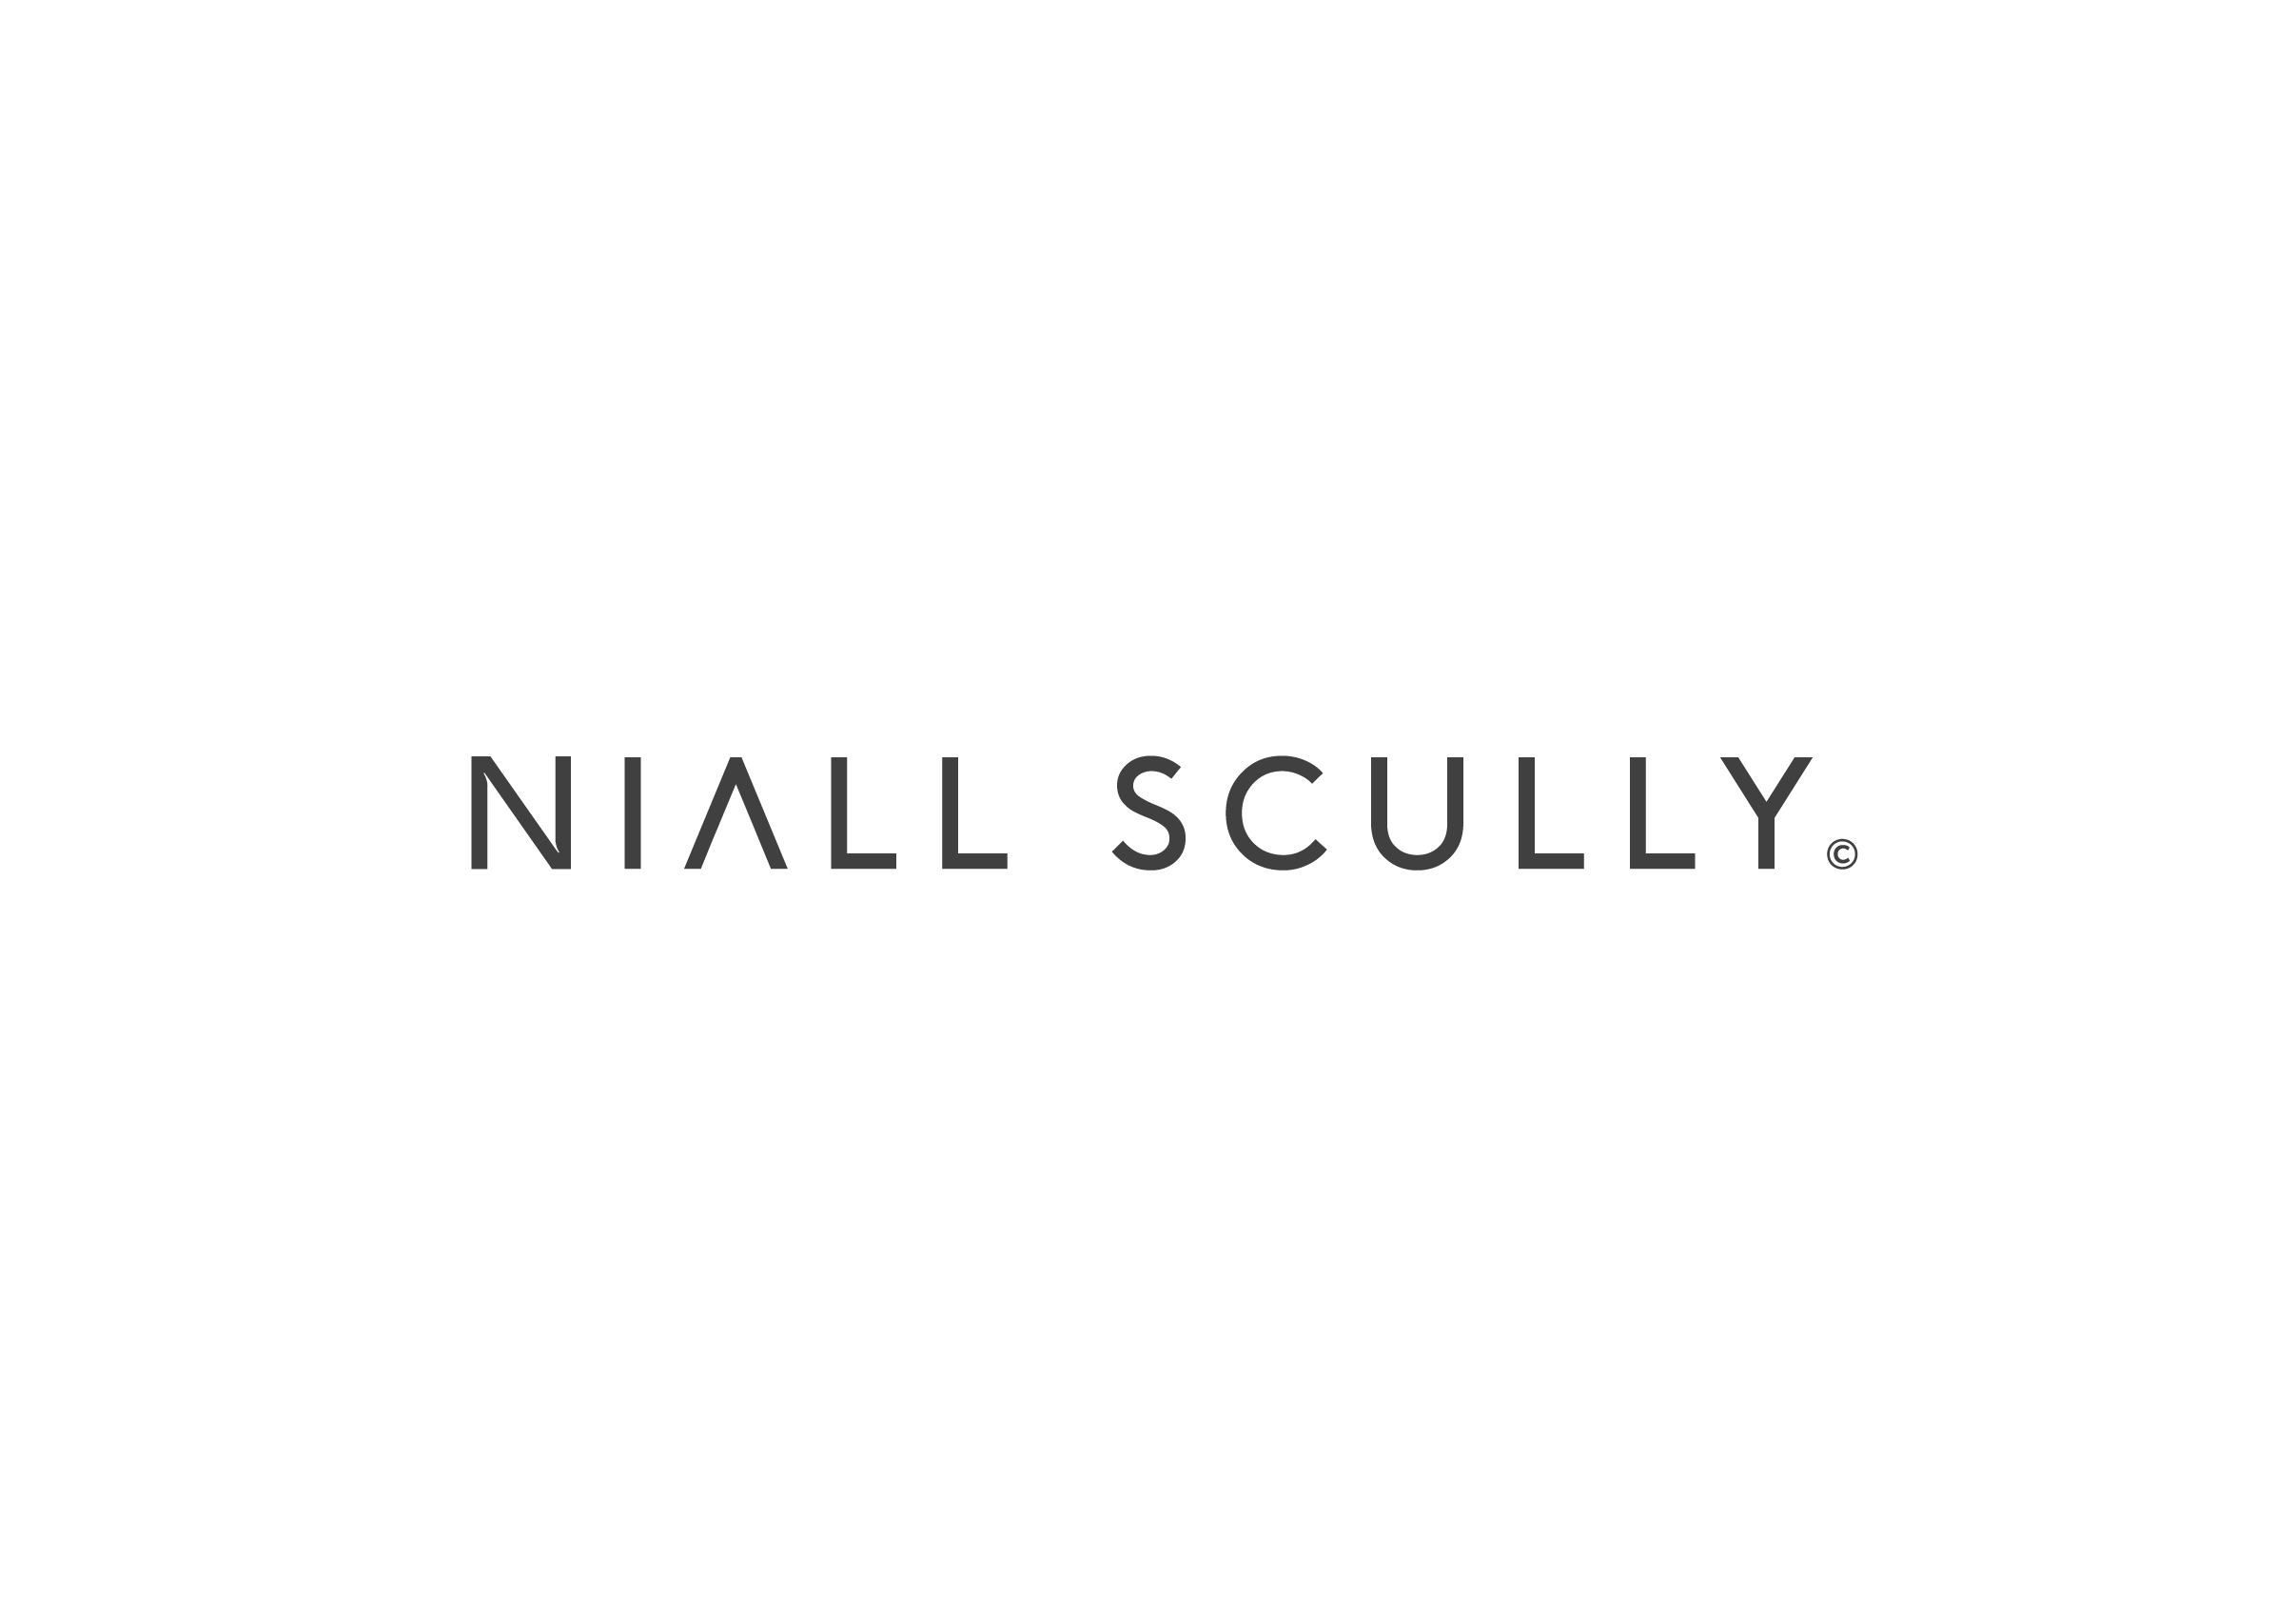 Niall Scully Photography